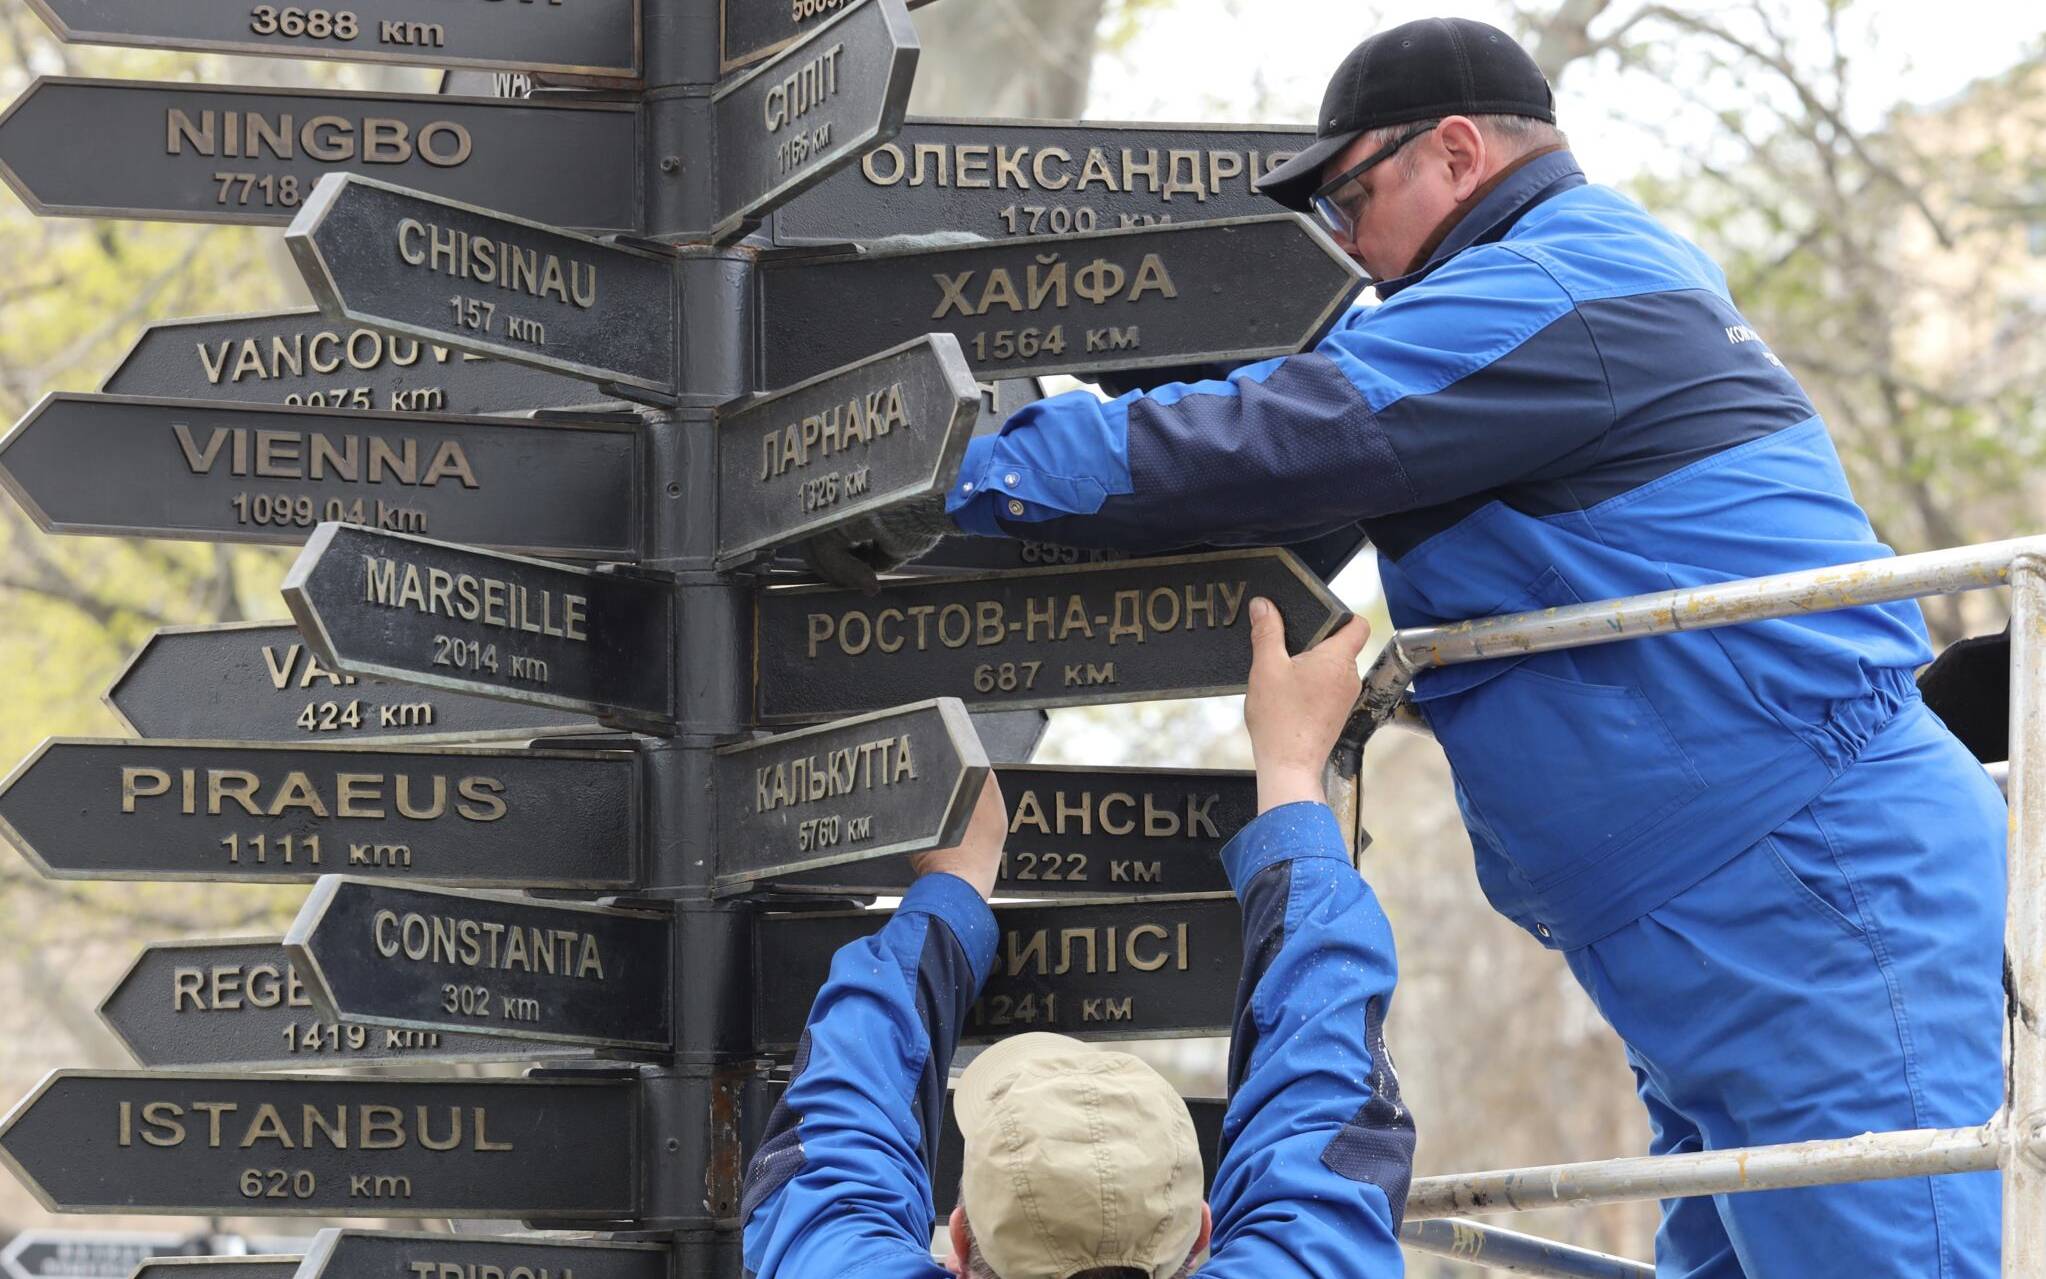 Communal sevices workers dismantle plates bearing the names of Russian cities from a decorative street sign indicating directions and distances of Odessa's sister cities, in the centre of the Ukrainian Black Sea port of Odessa on April 14, 2022, amid Russia's military invasion launched on Ukraine. (Photo by Oleksandr GIMANOV / AFP)